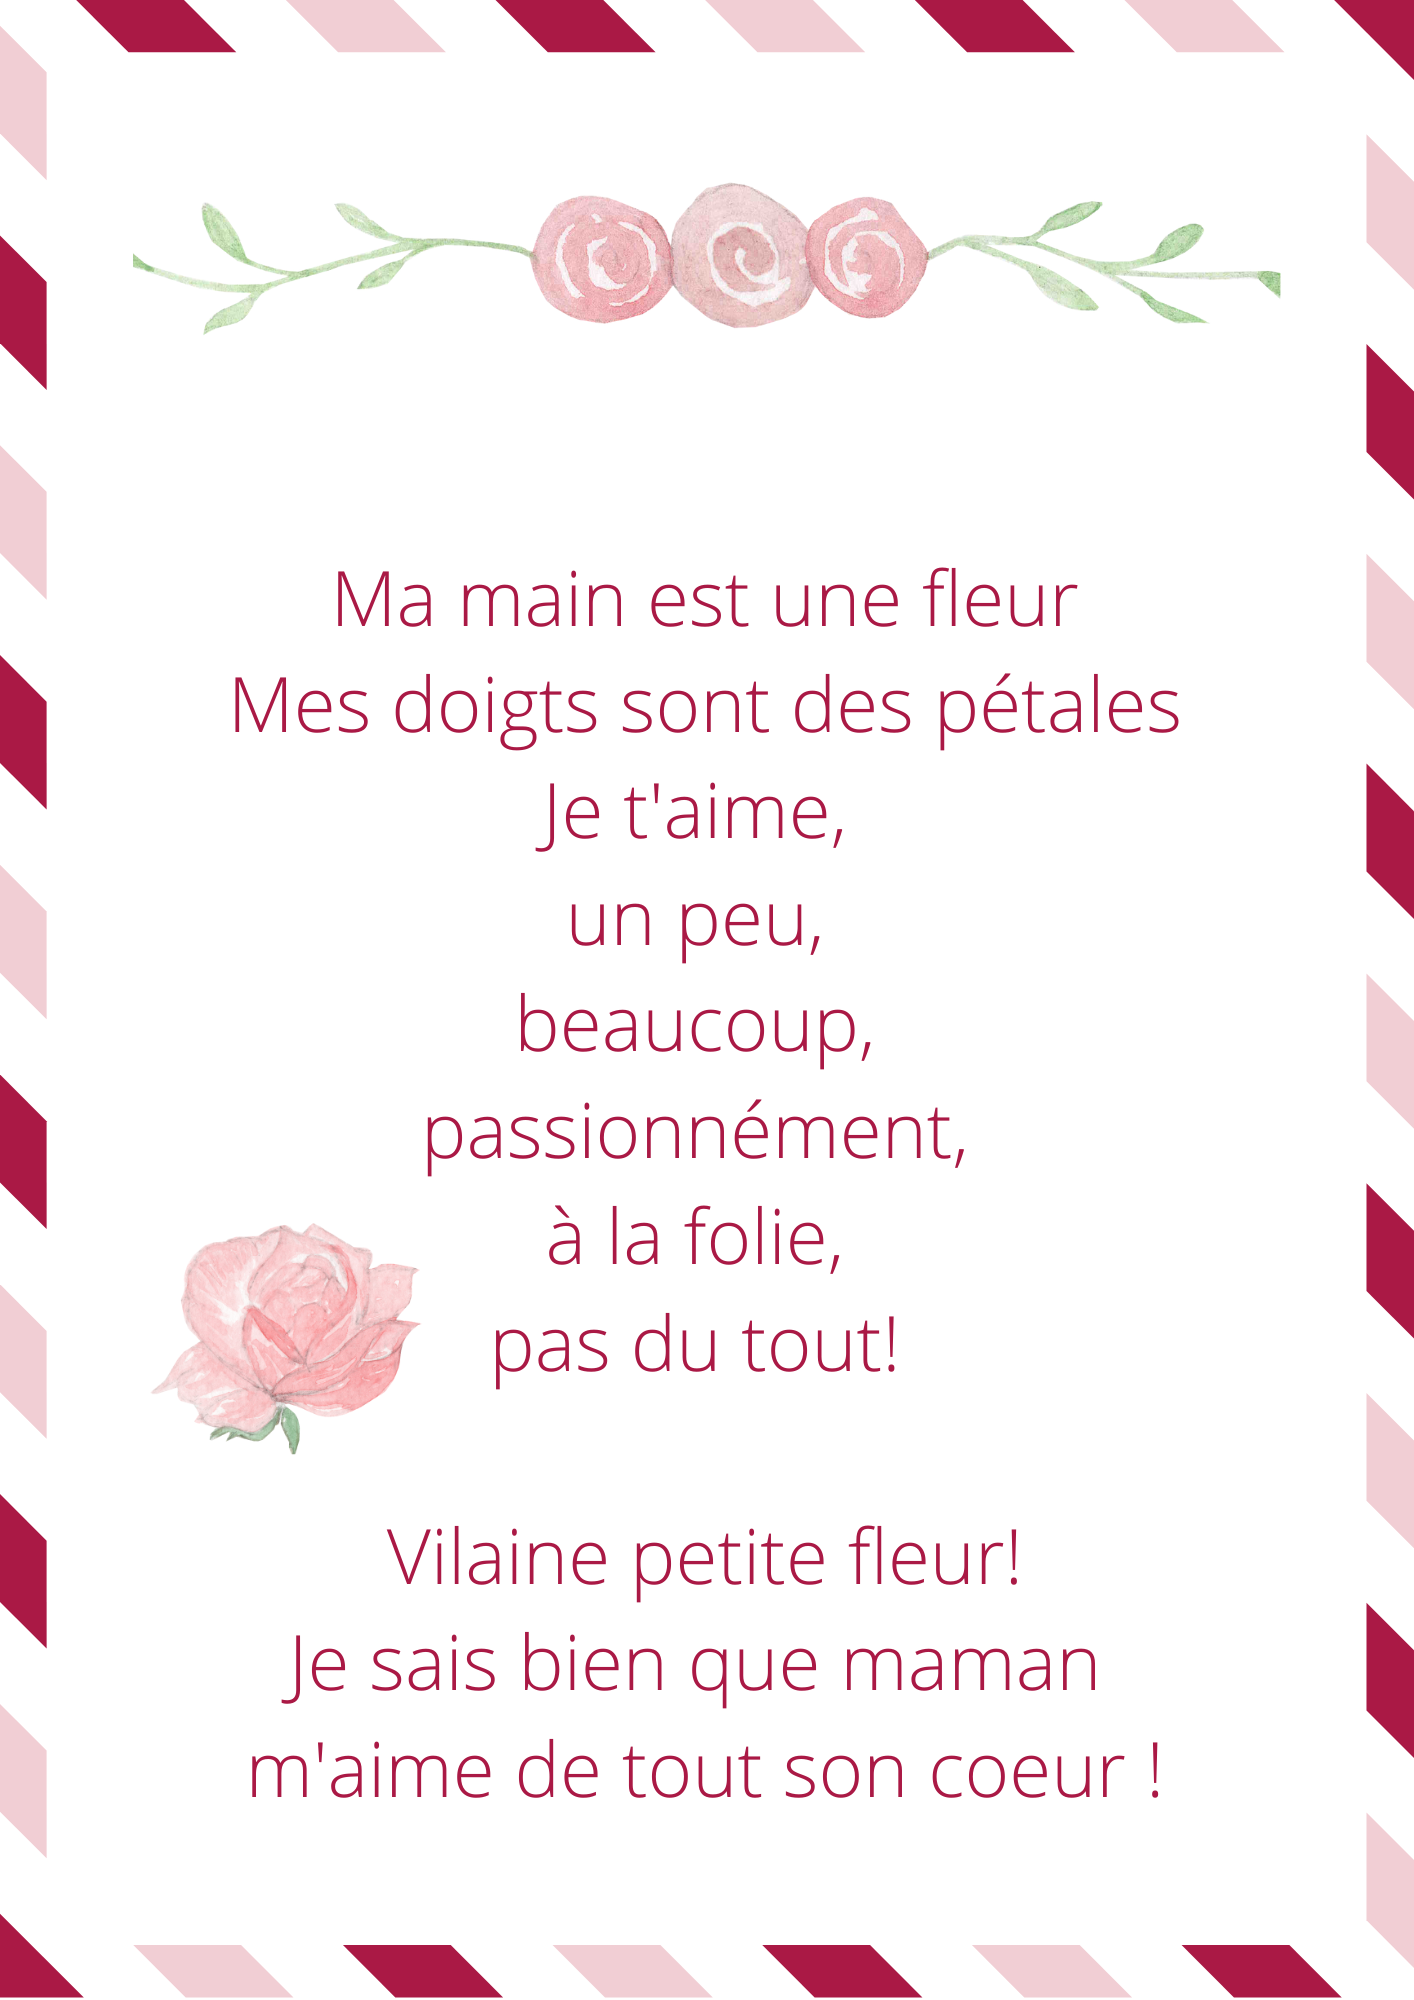 French poem for mother's day All about France and family traditions comptine fleur de ma main